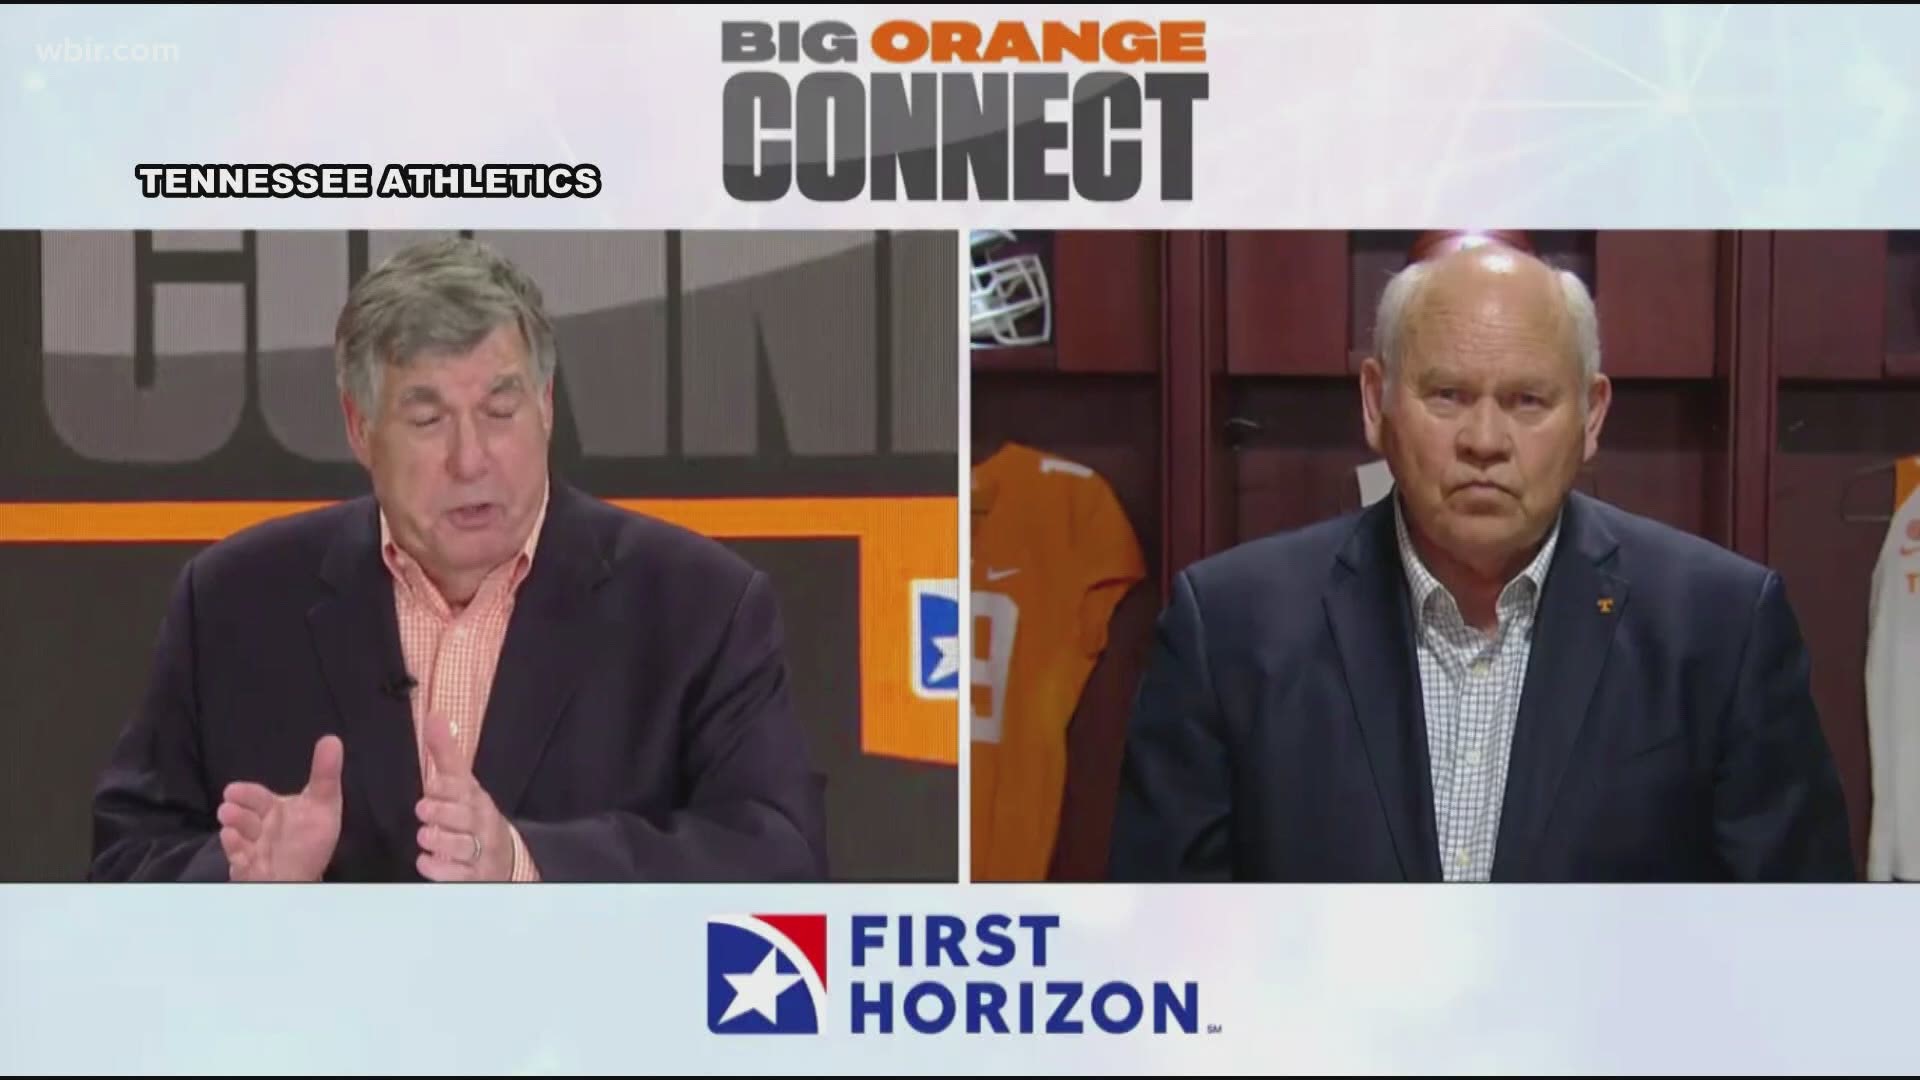 Big Orange Connect brought together head coaches and administration.